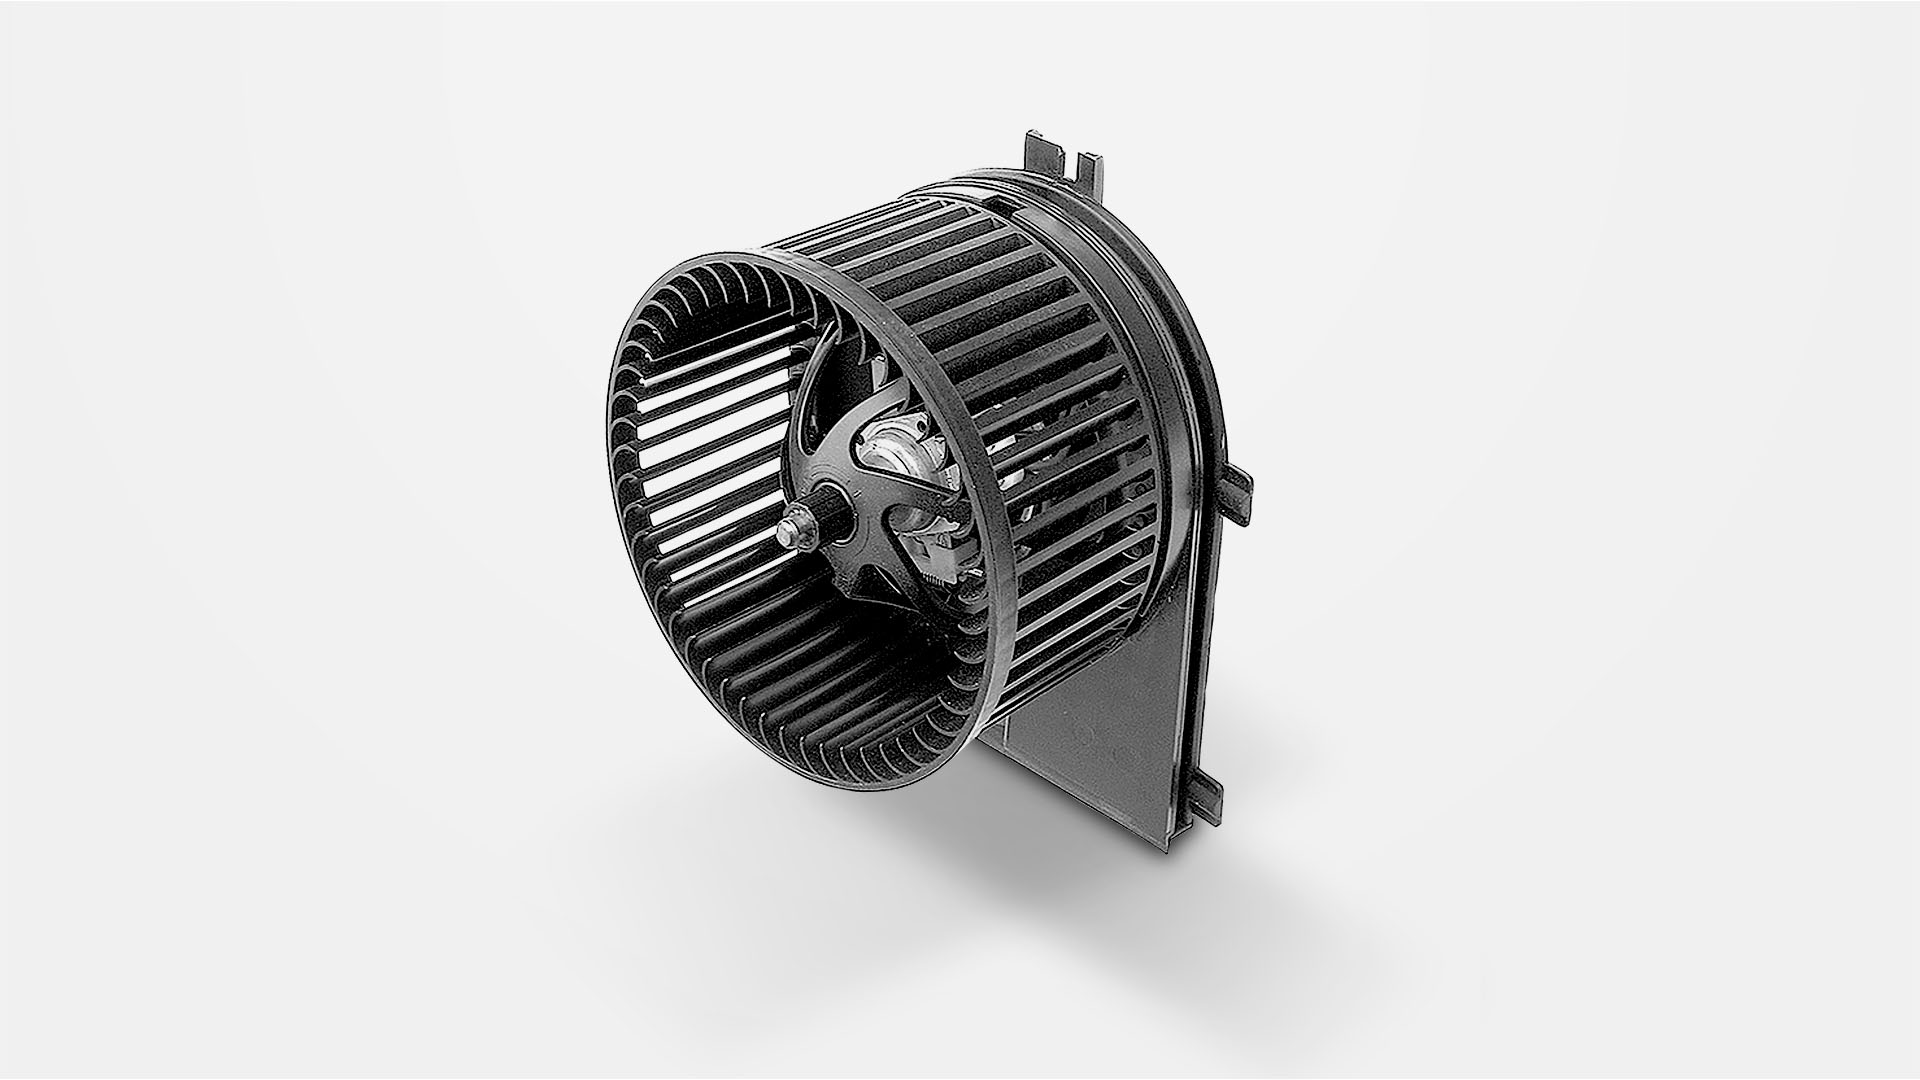 Blower and fan systems